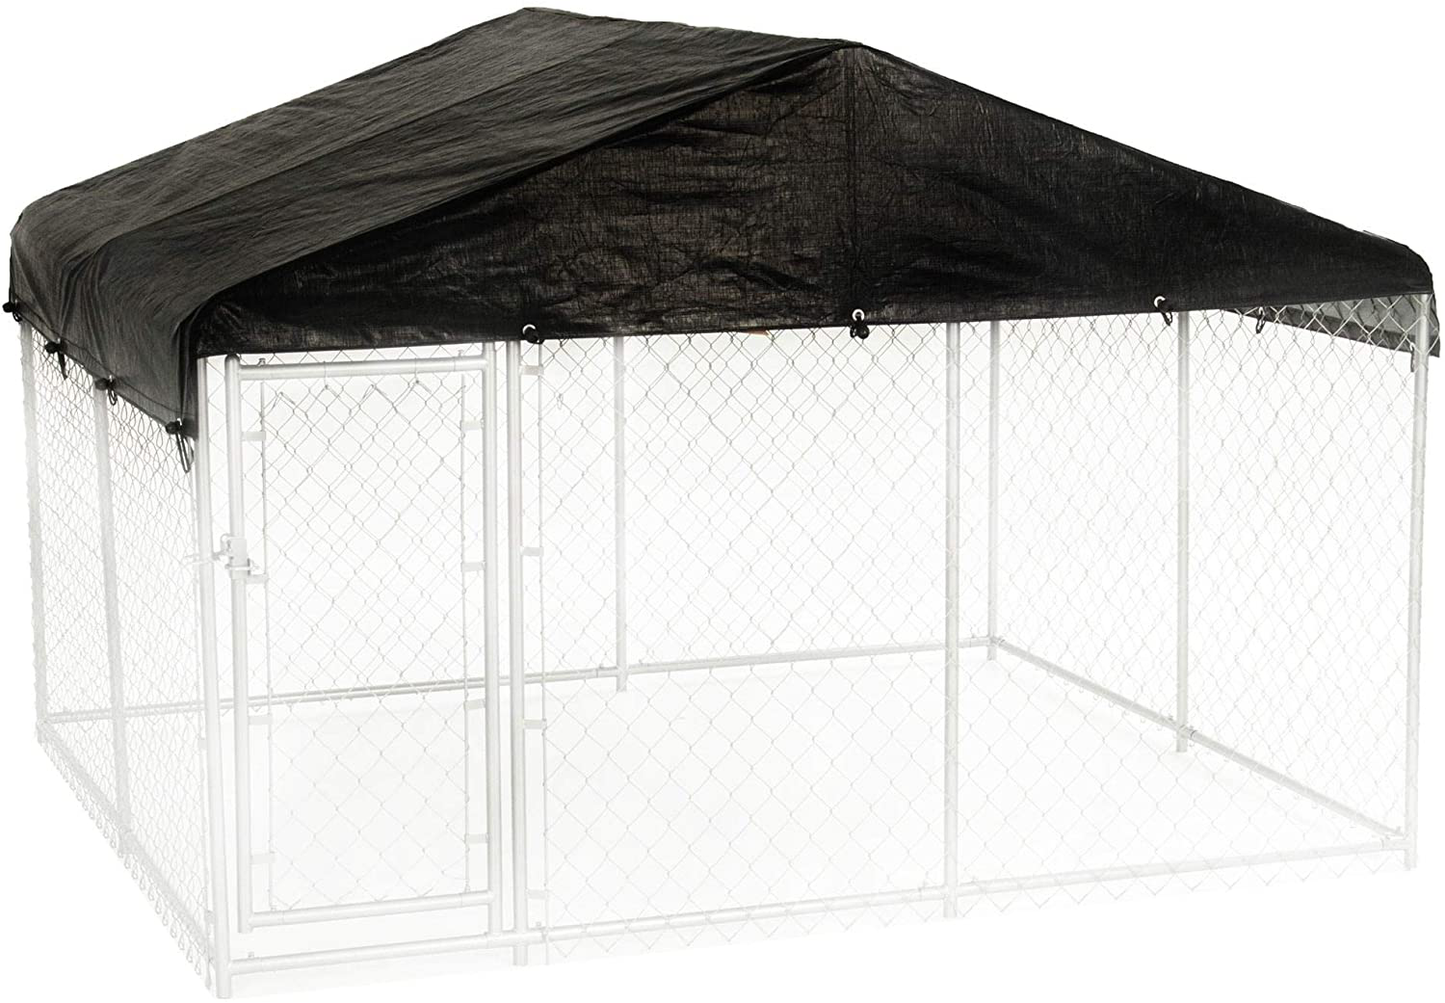 Lucky Dog 61528EZ 10' X 10' X 6' Heavy Duty Outdoor Galvanized Steel Chain Link Dog Kennel Enclosure with Latching Door, 1.5" Raised Legs, and Weatherguard 10 X 10 Foot Roof Cover